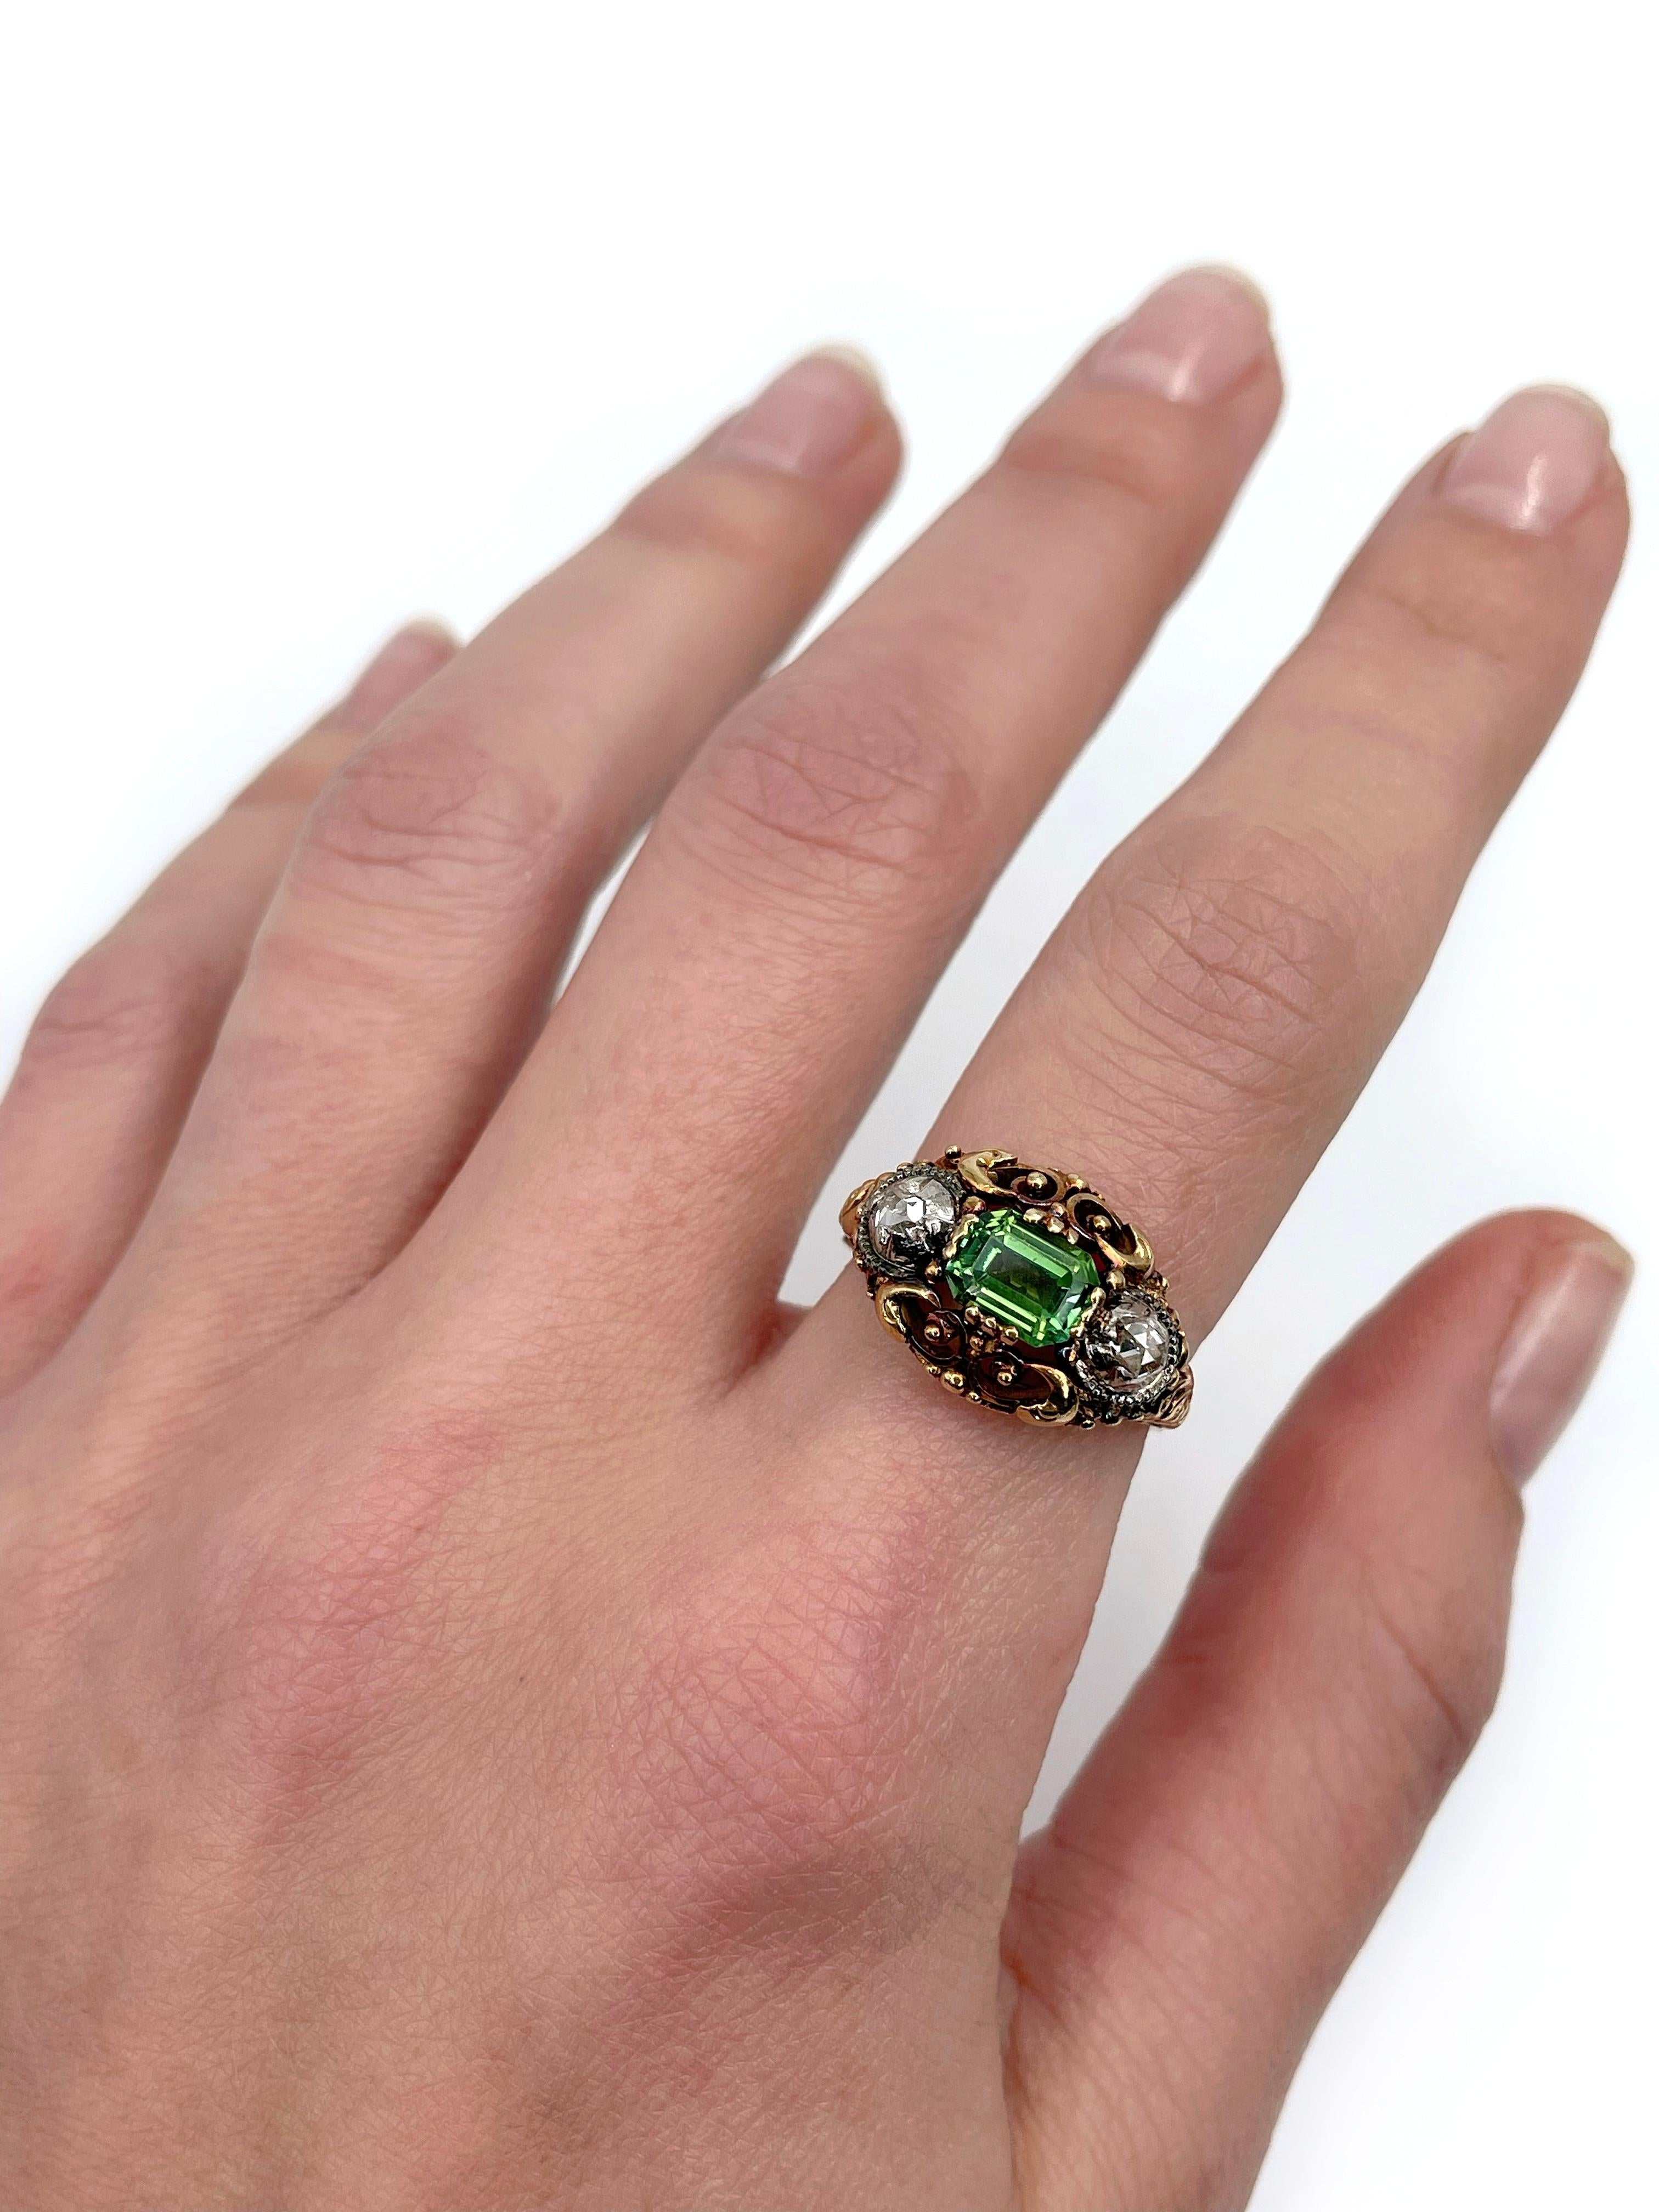 This is a stunning Victorian three stone ring crafted in 18K gold. Circa 1880. The piece features beautiful green rectangle shape tourmaline. It is paired with two rose cut diamonds. The ring is highly decorated. 

Weight: 5.47g 
Size: 17.25 (US